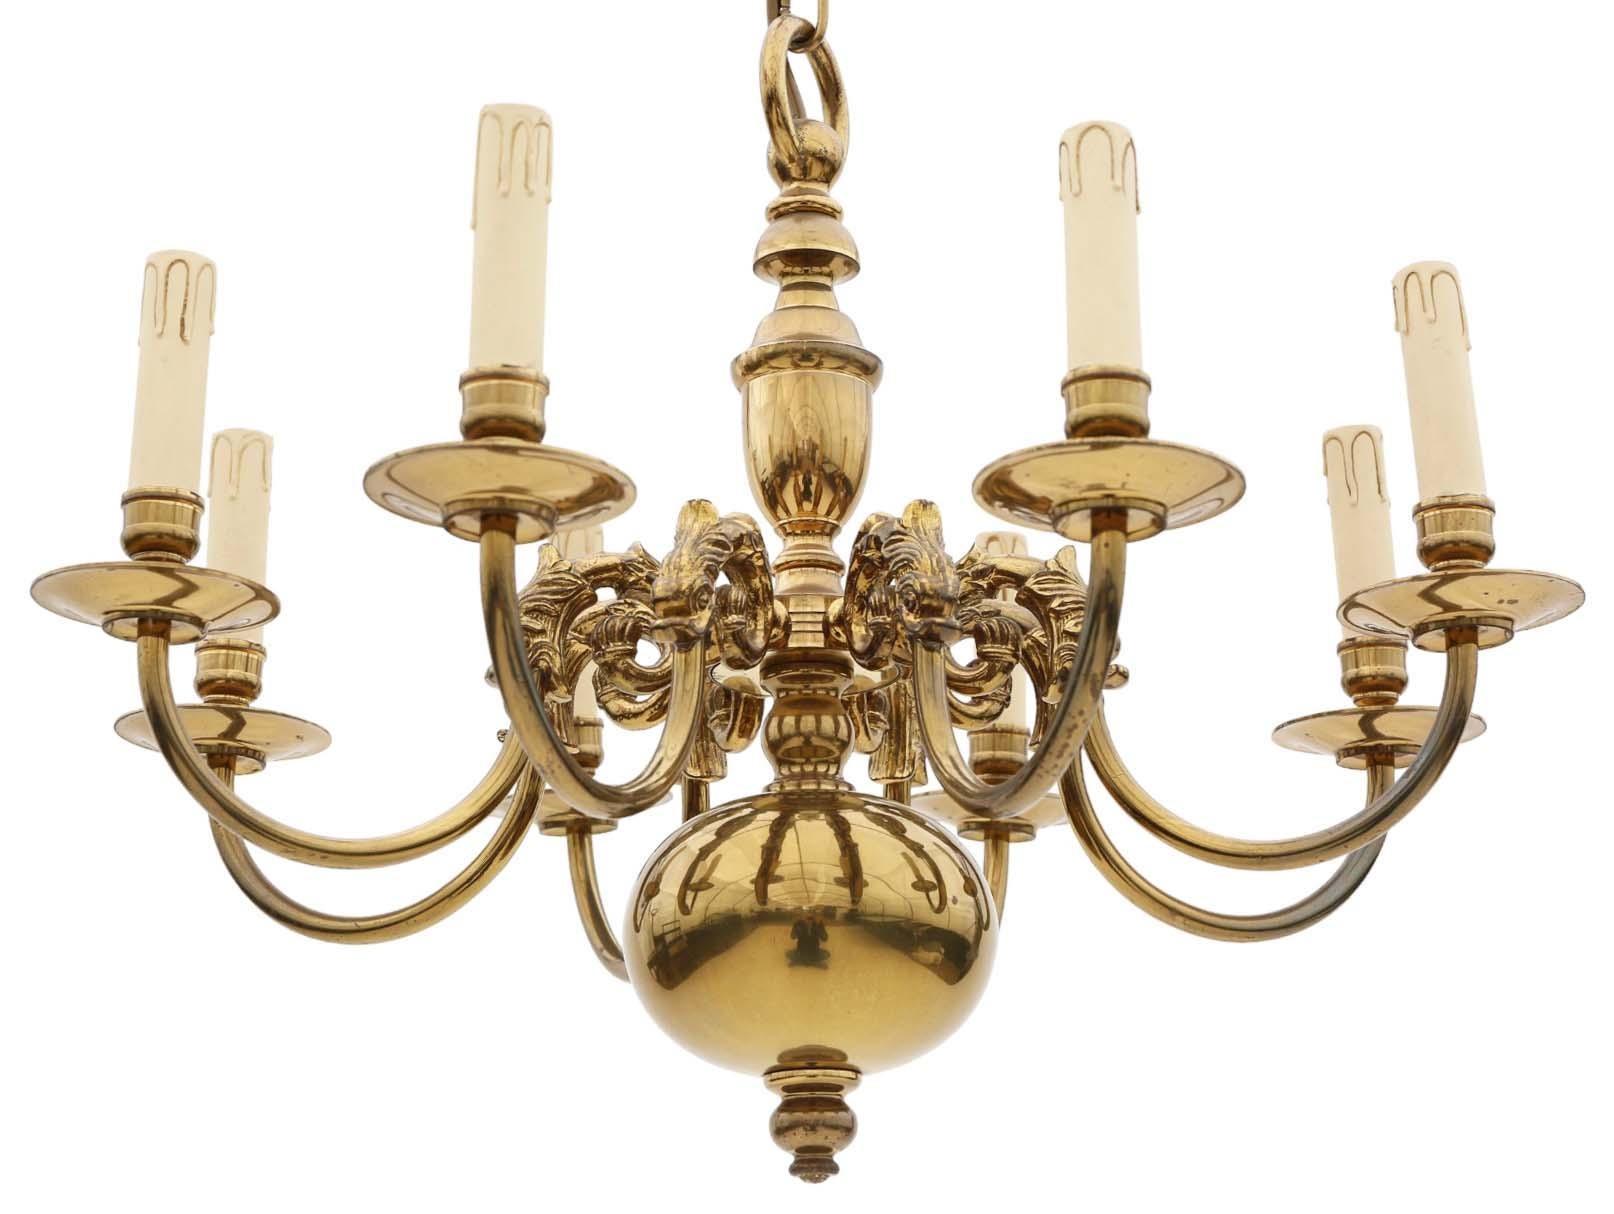 Wood Antique Vintage Ormolu Brass Chandelier with 8 Lamps/Arms For Sale